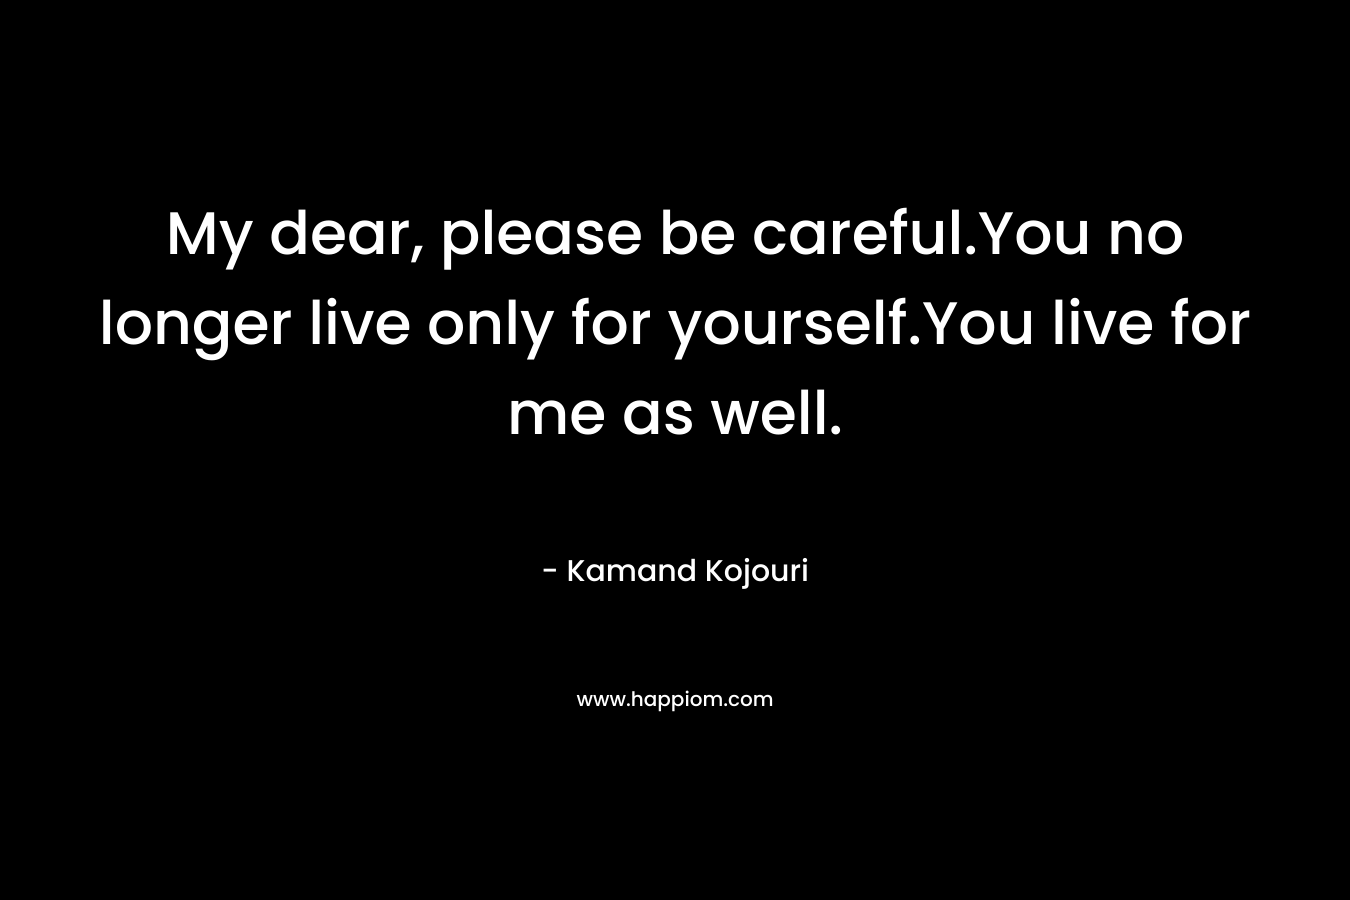 My dear, please be careful.You no longer live only for yourself.You live for me as well.